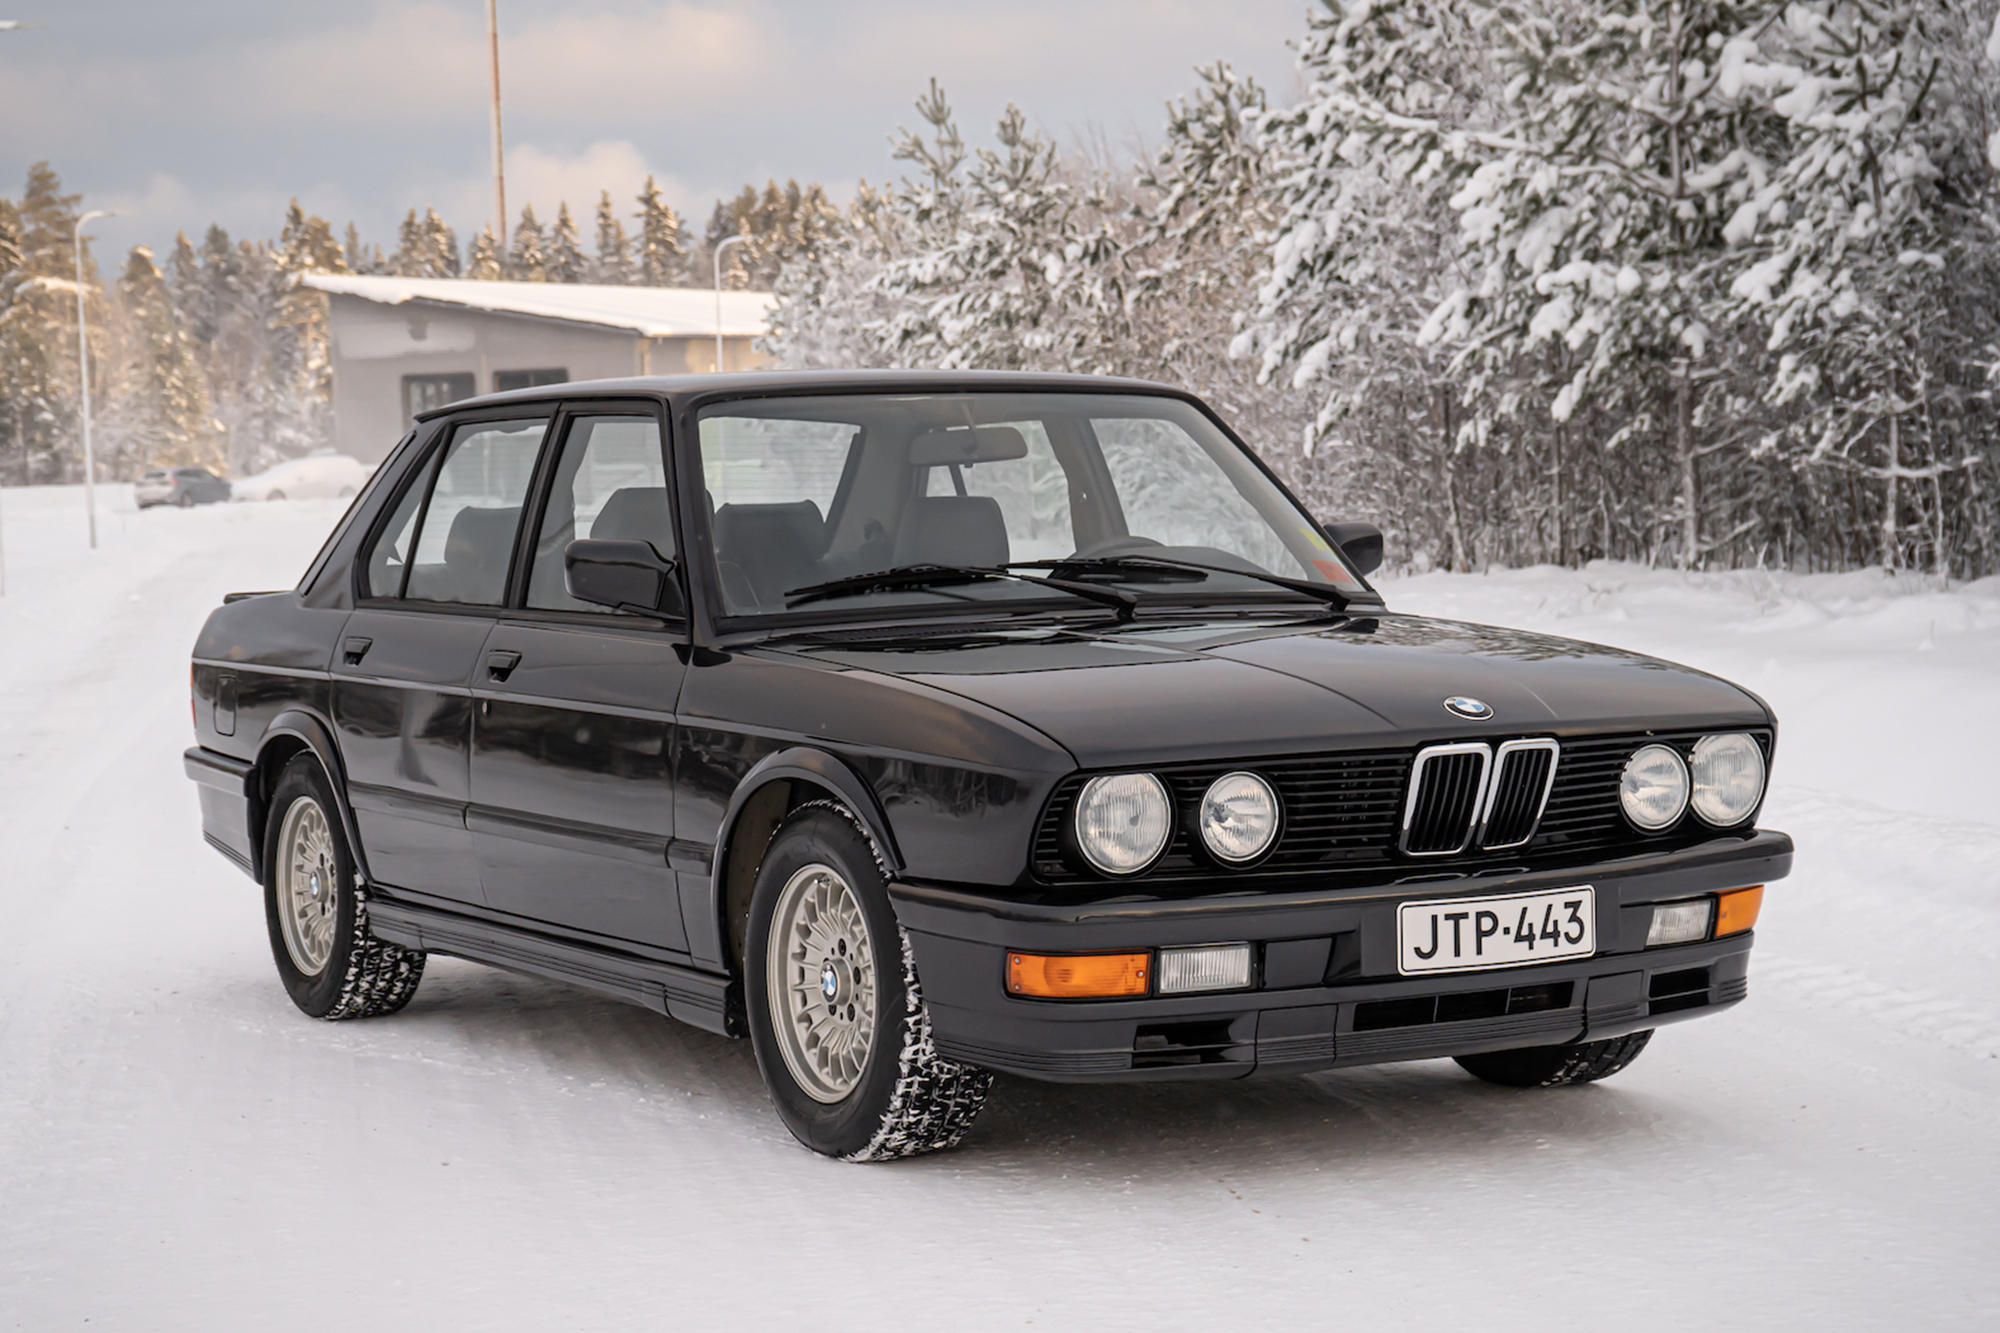 1986 BMW (E28) M535I for sale by auction in Nykarleby, Finland photo